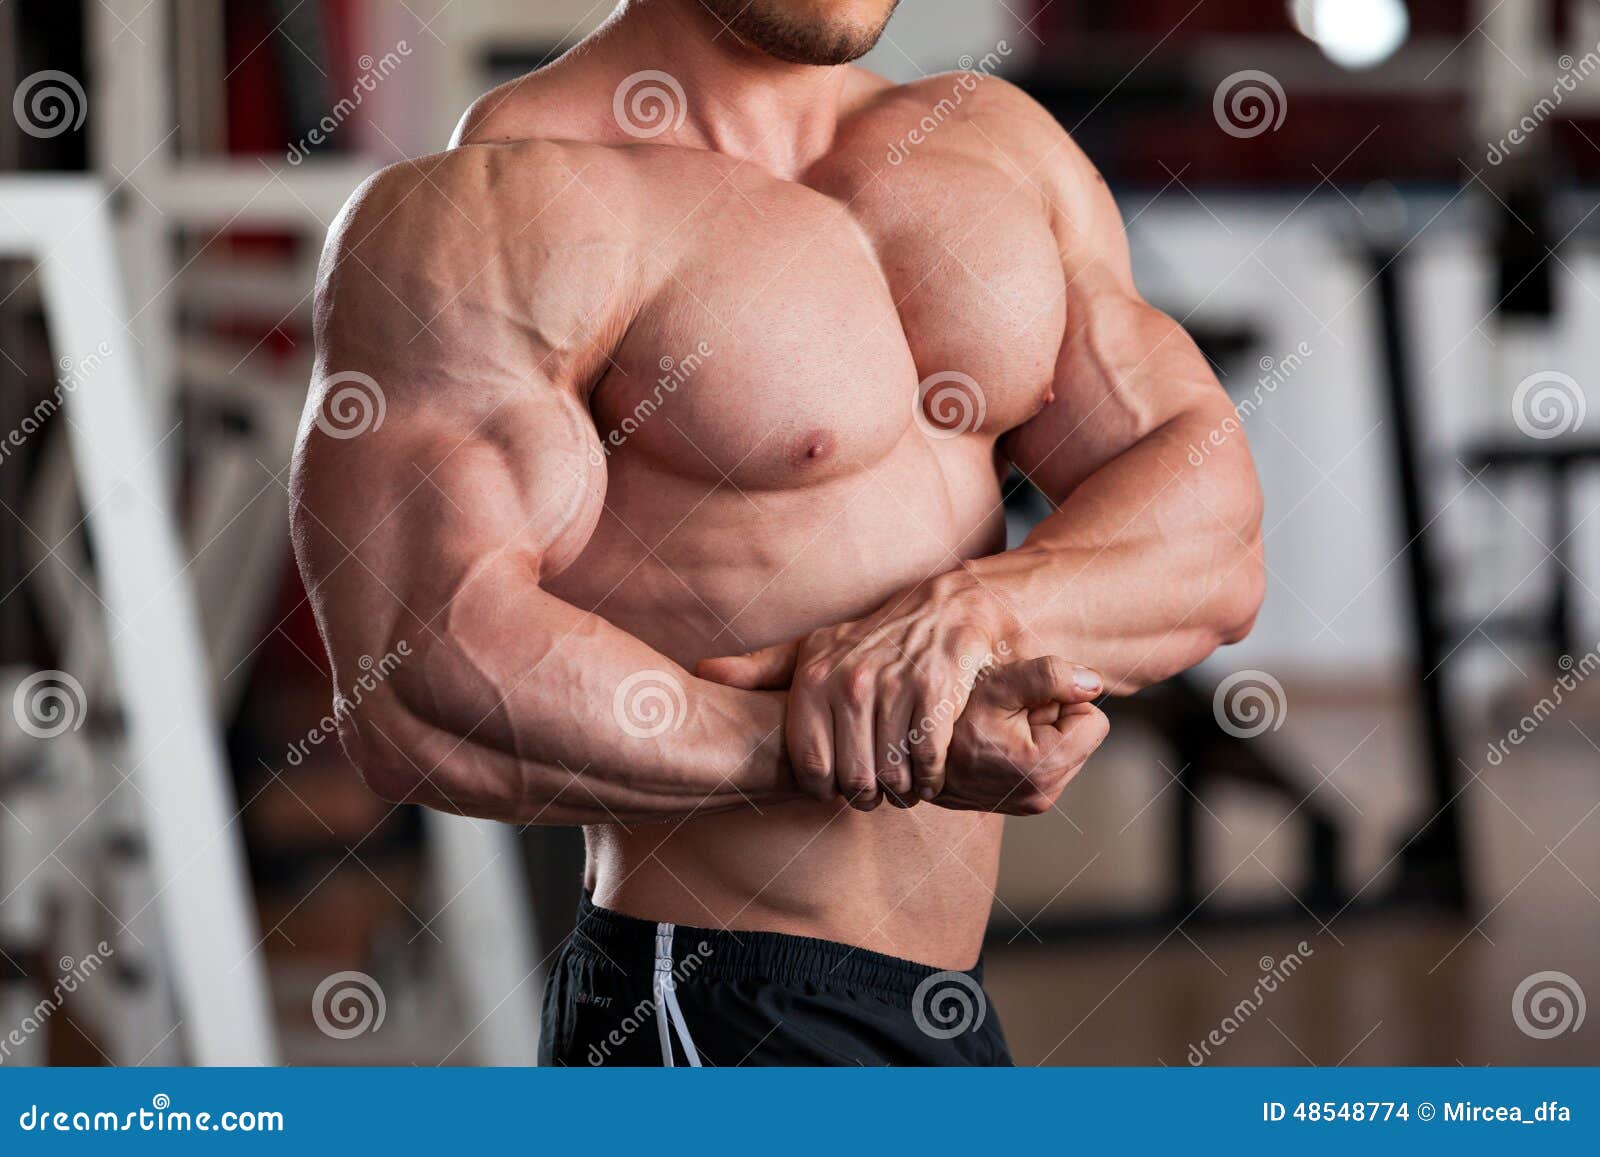 Bodybuilder Performing Side Chest Pose Bodybuilder Performing Side Chest  Pose Y